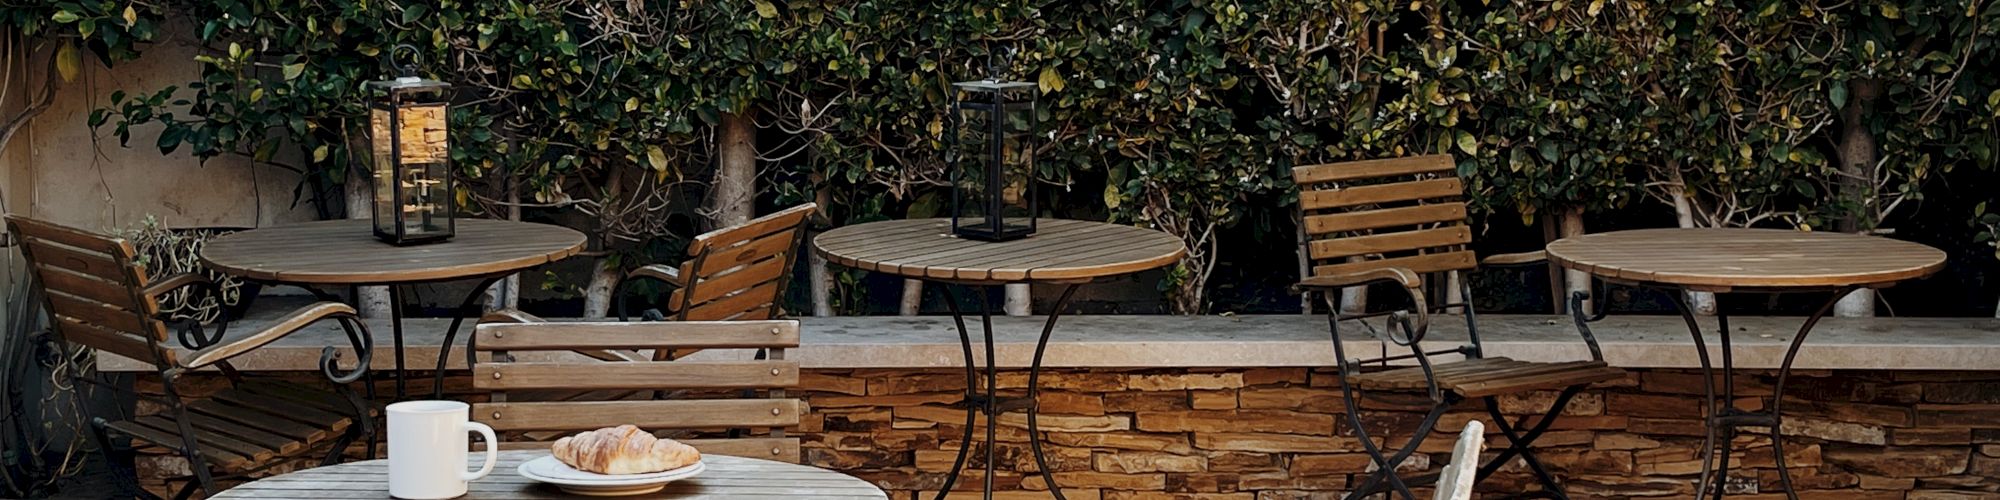 An outdoor seating area with metal tables and chairs is shown, surrounded by greenery in the background, and a coffee cup and pastry are on one table.